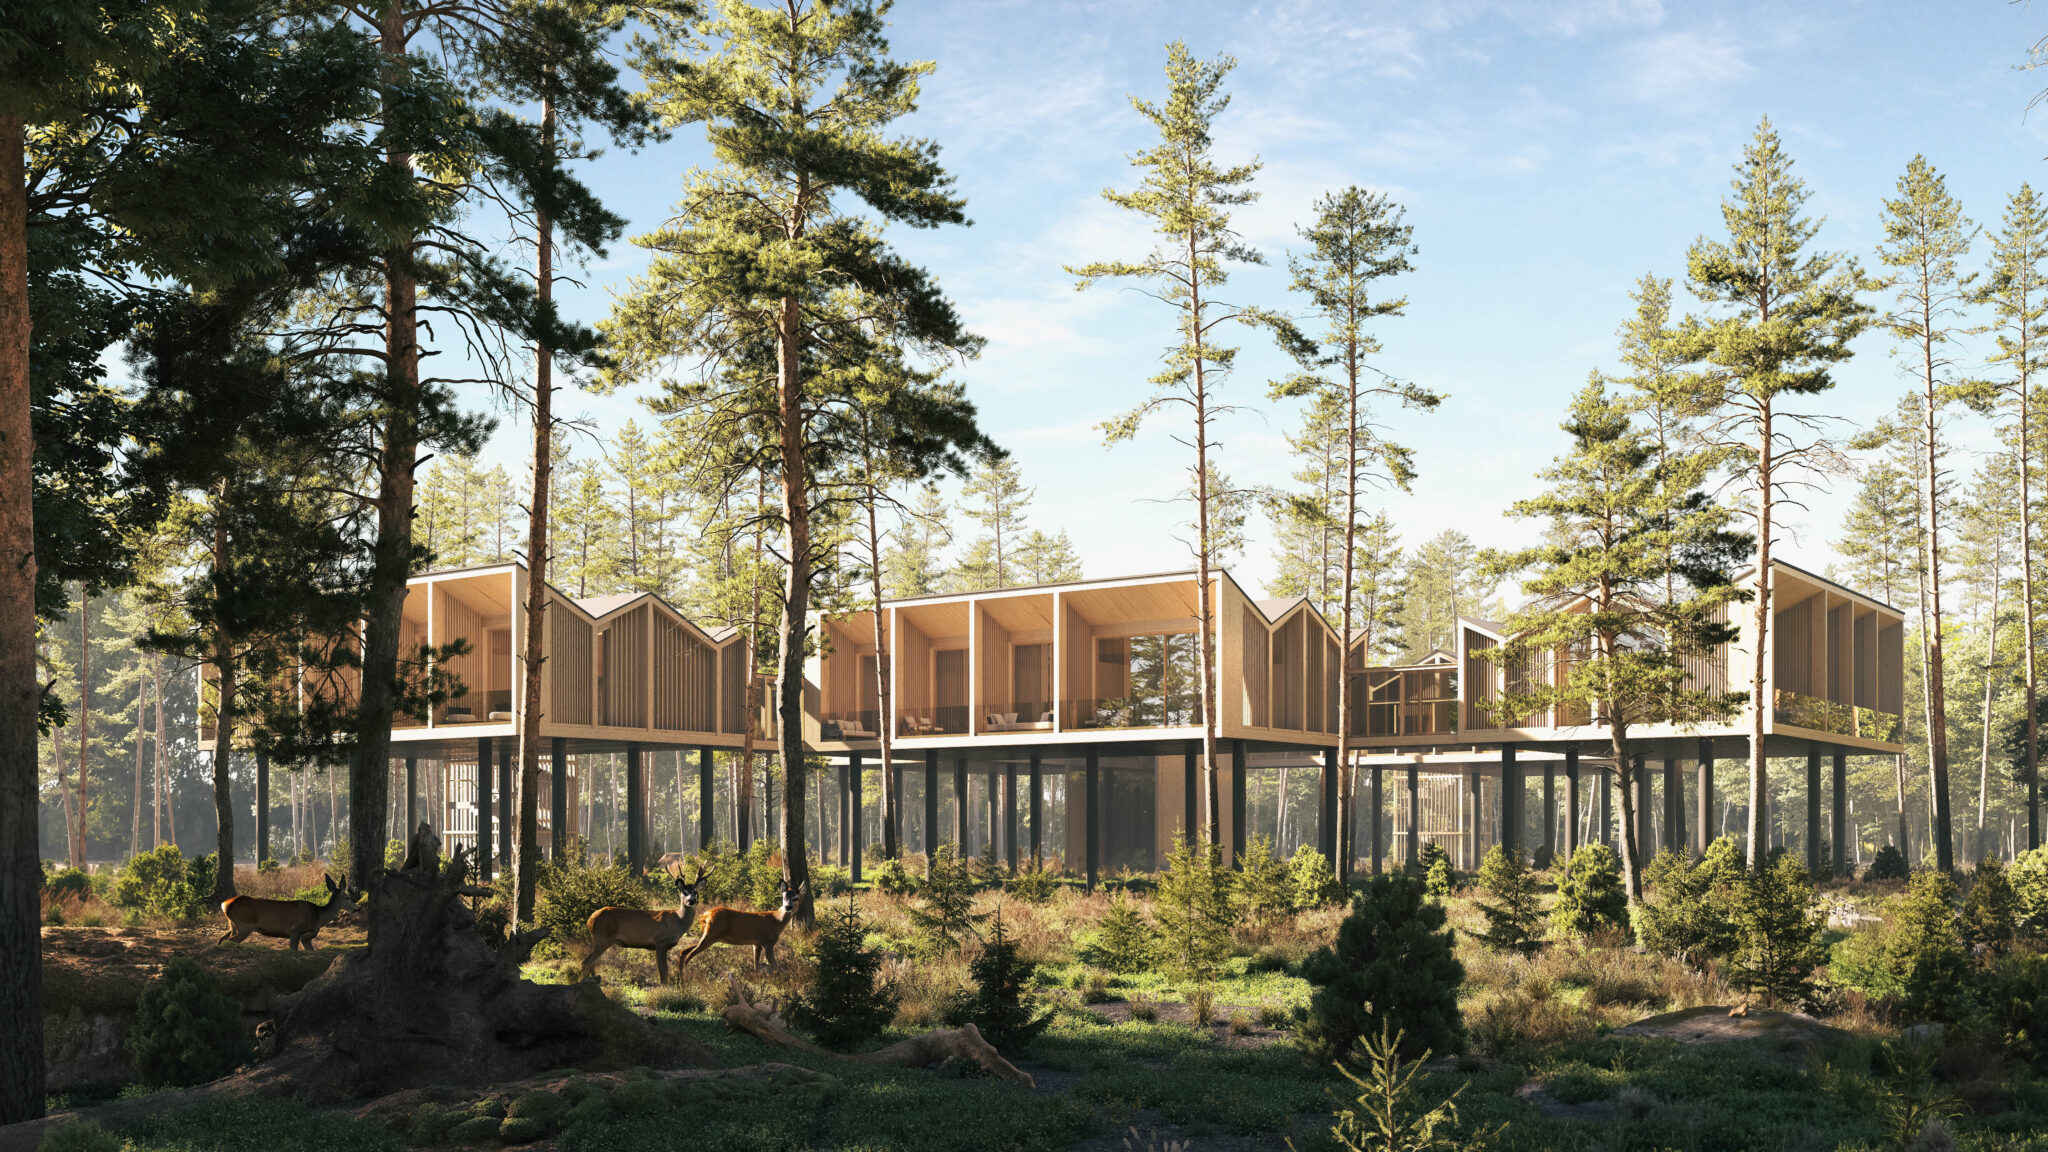 Architecture in Response to Nature: Hotel in Mazury